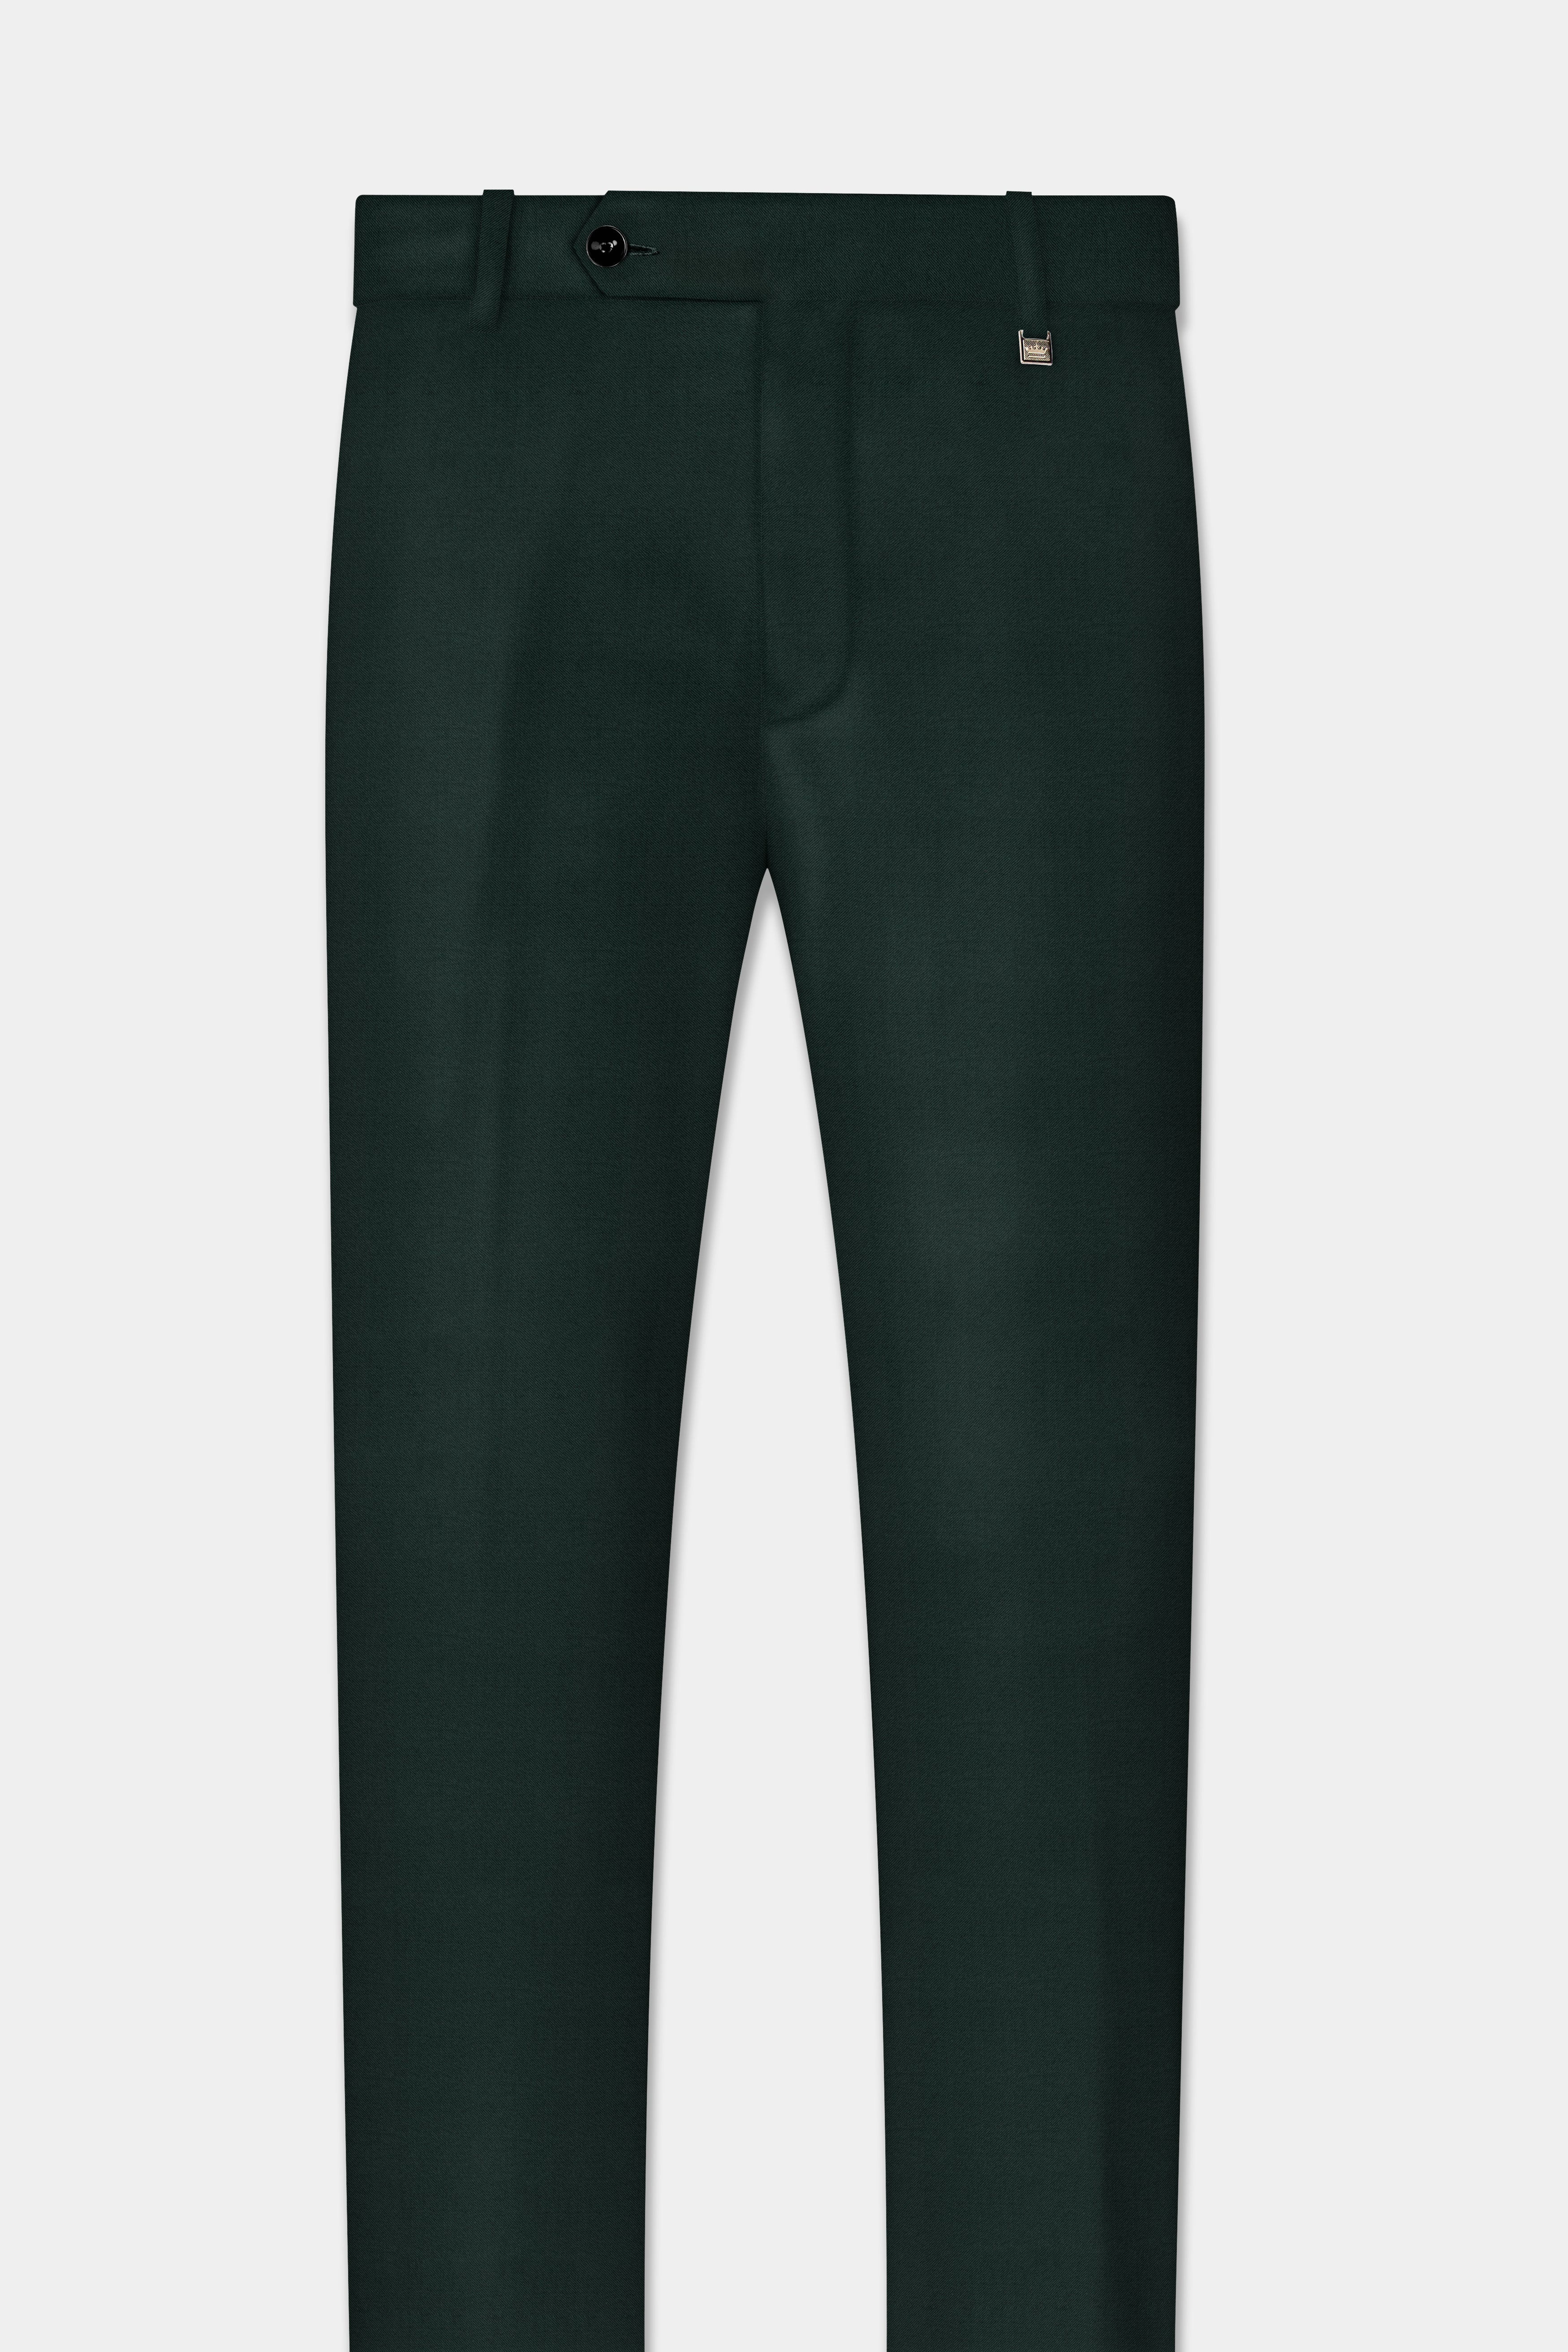 Green Rayon Casual Trouser, Size: M, L & XL at Rs 350/piece in New Delhi